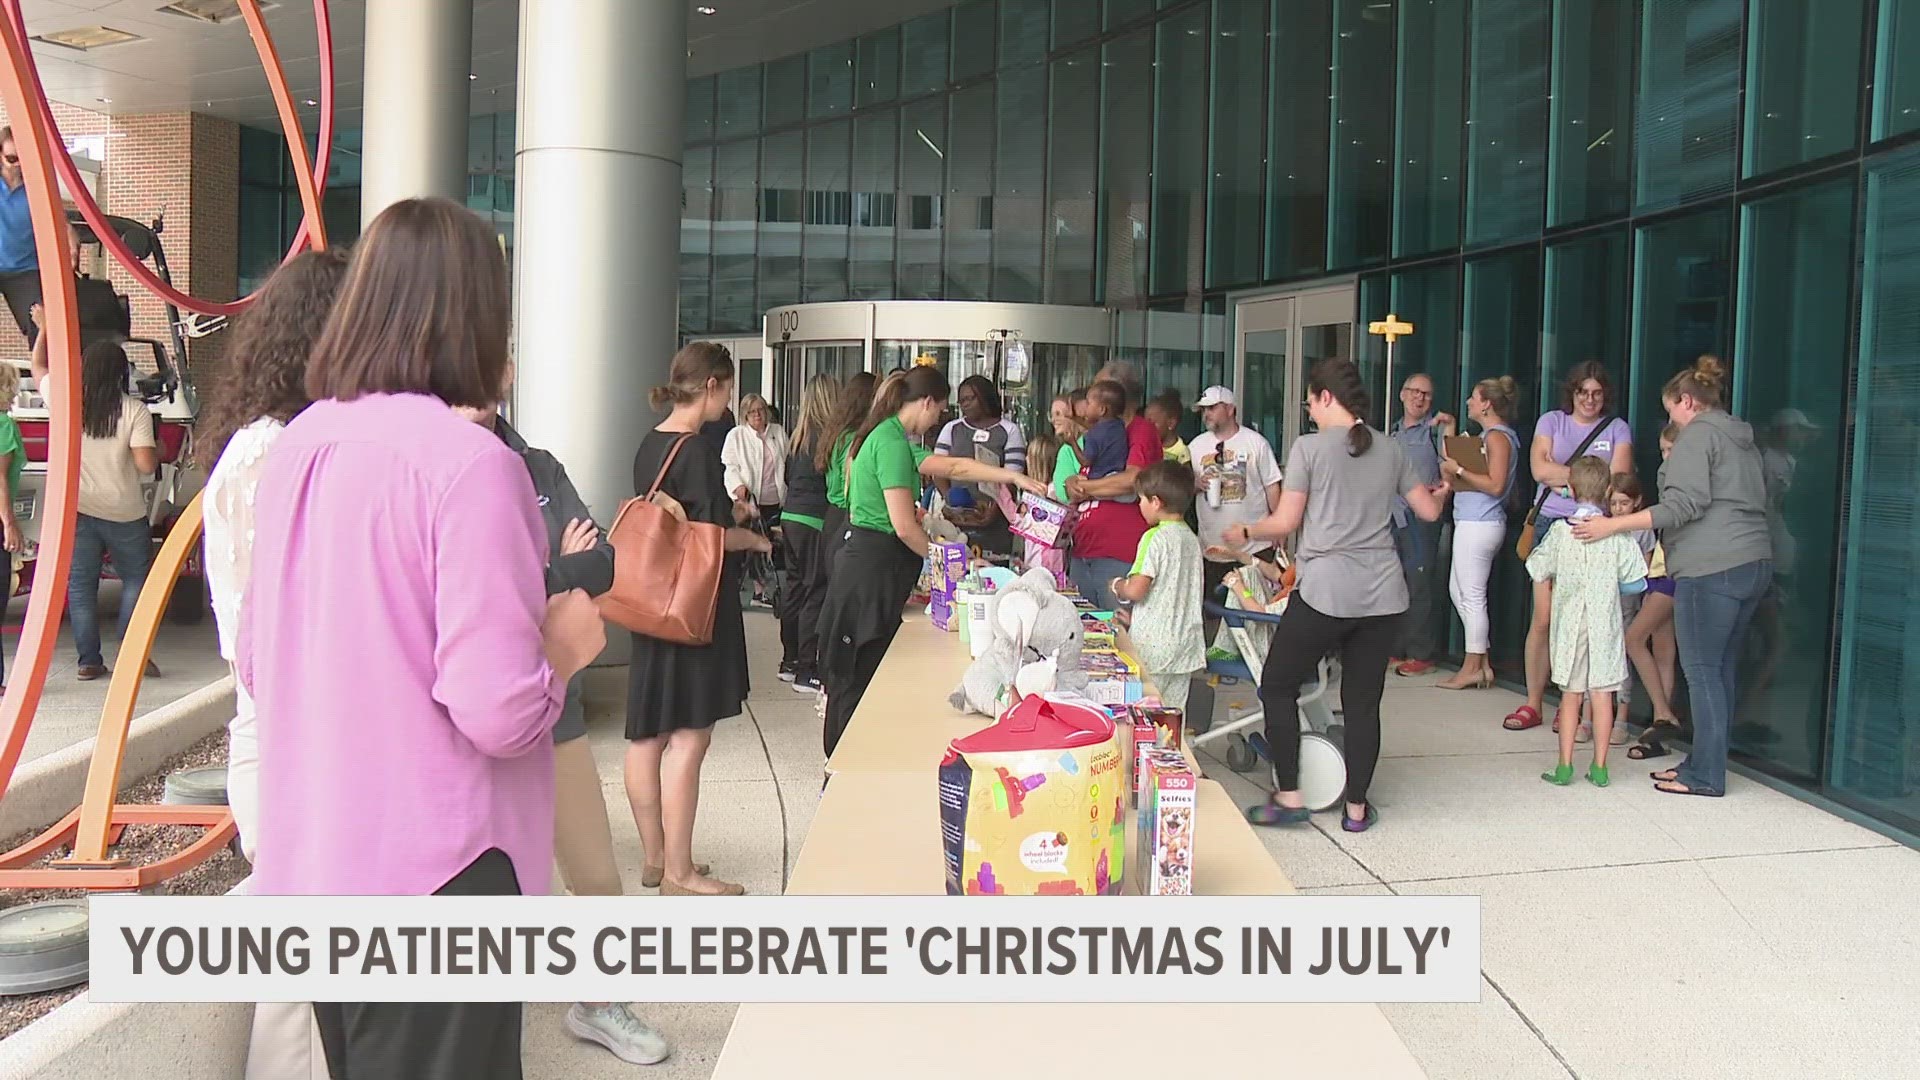 Christmas came early for young patients at Helen DeVos children's hospital today.